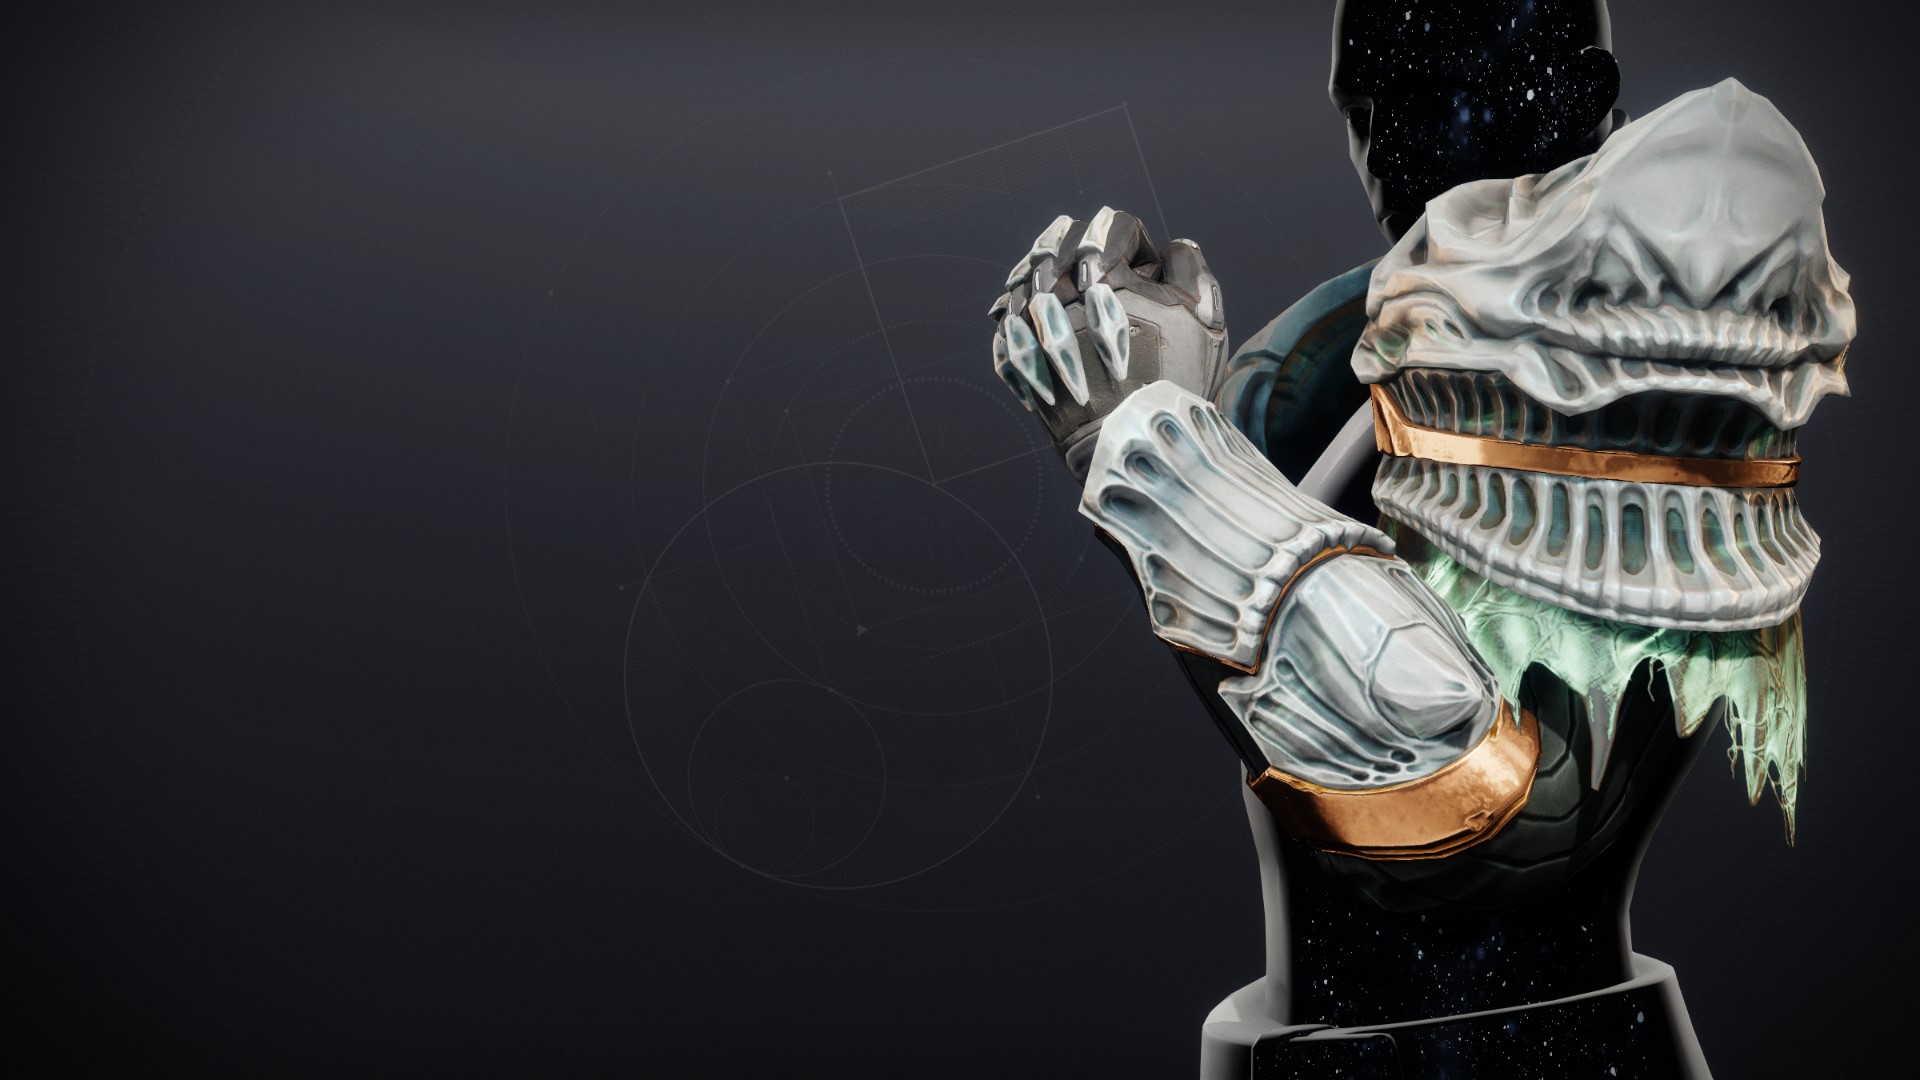 An in-game render of the Gauntlets of the Taken King.